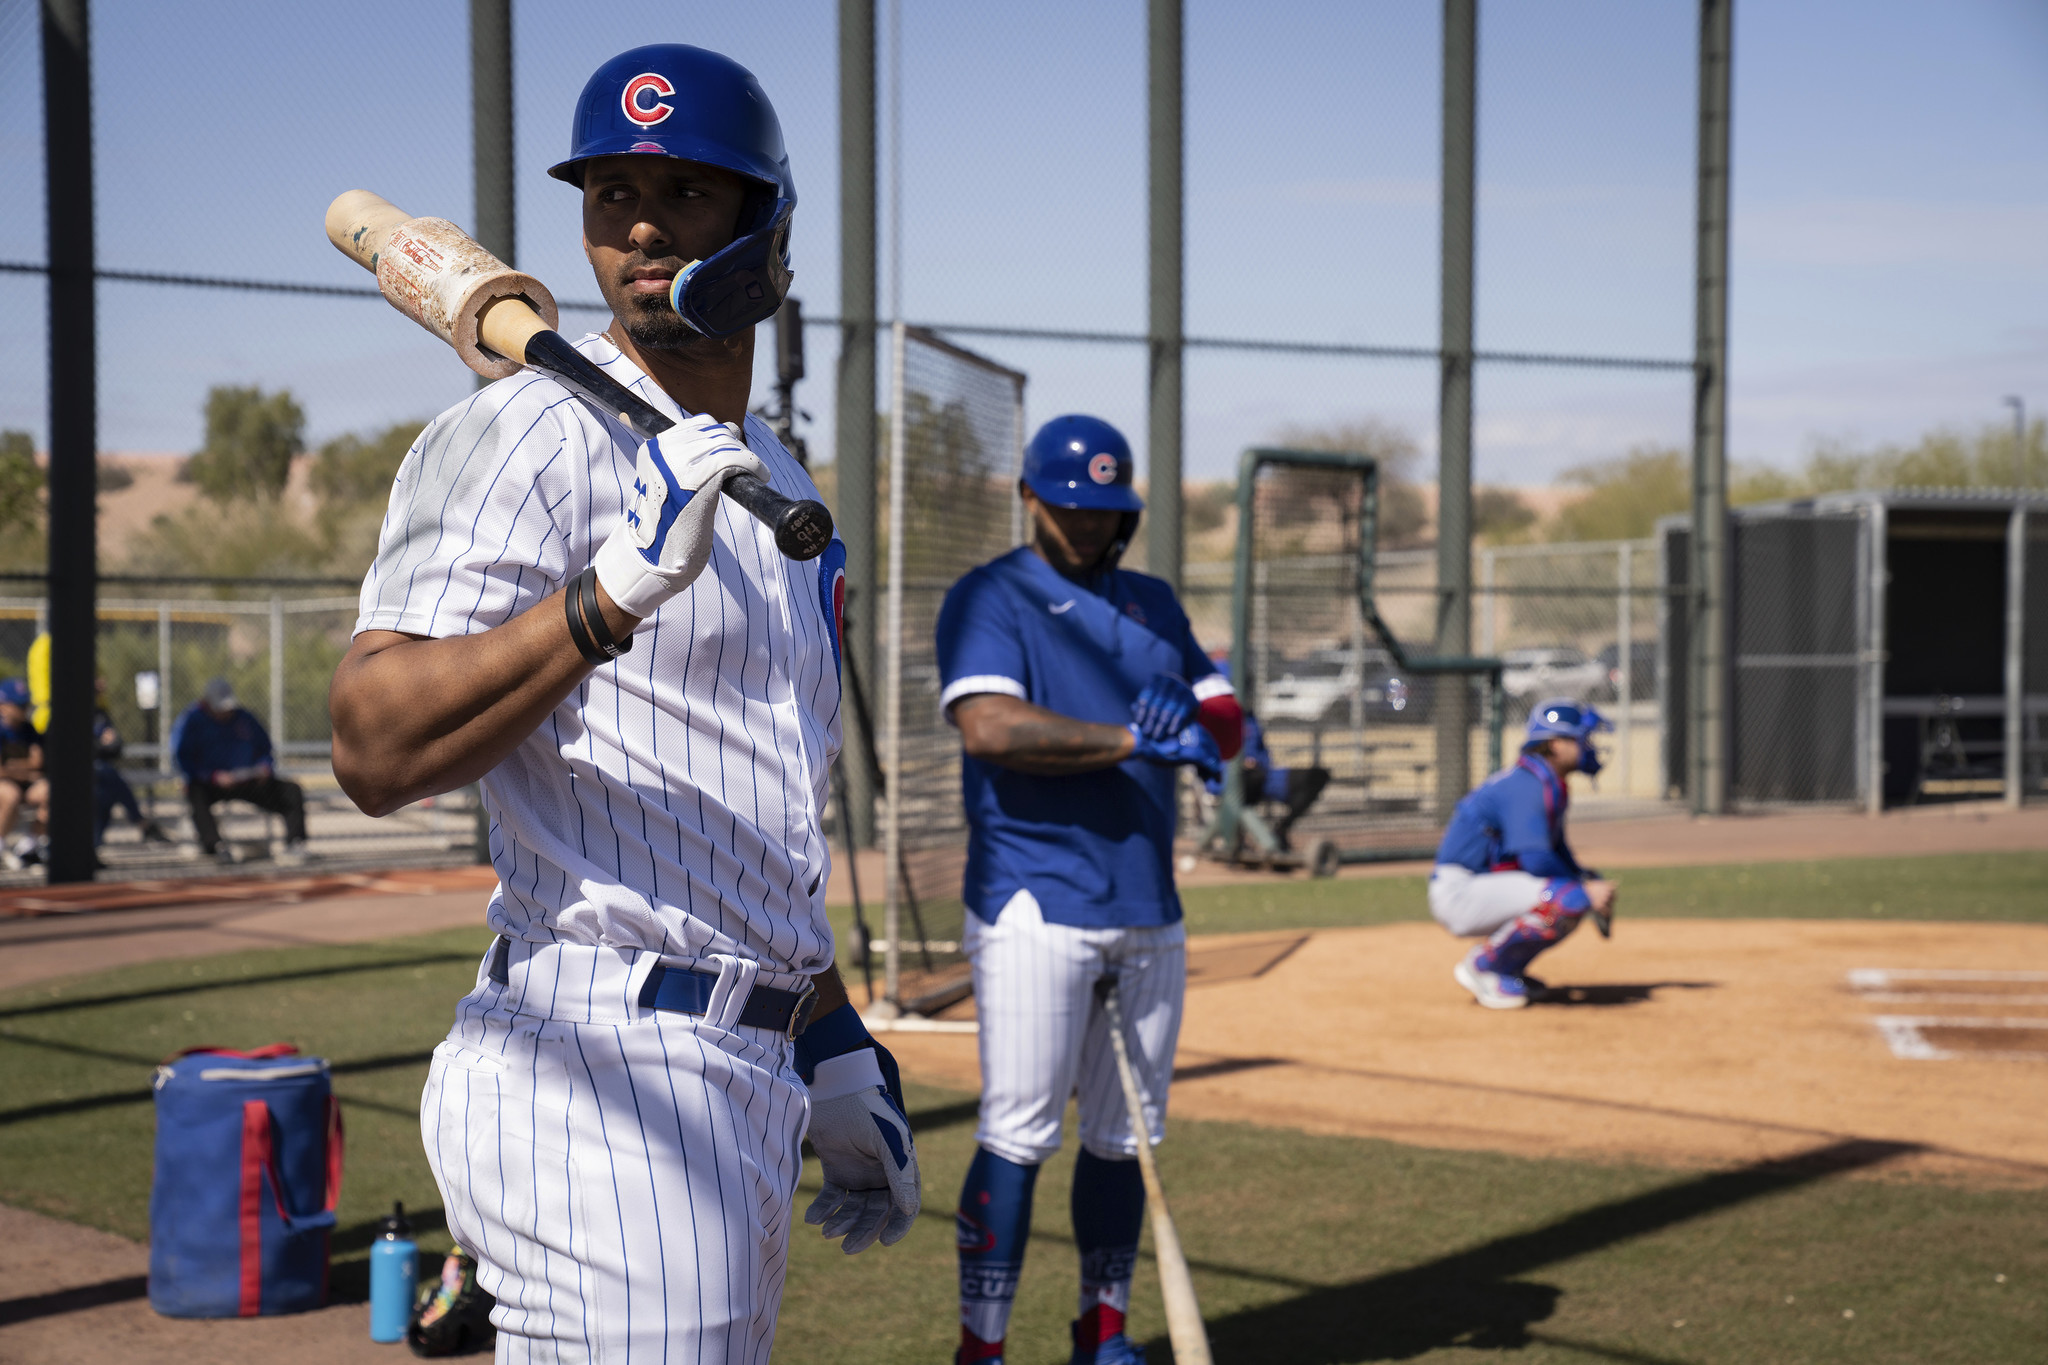 Chicago Cubs: A look at the minor-league affiliates